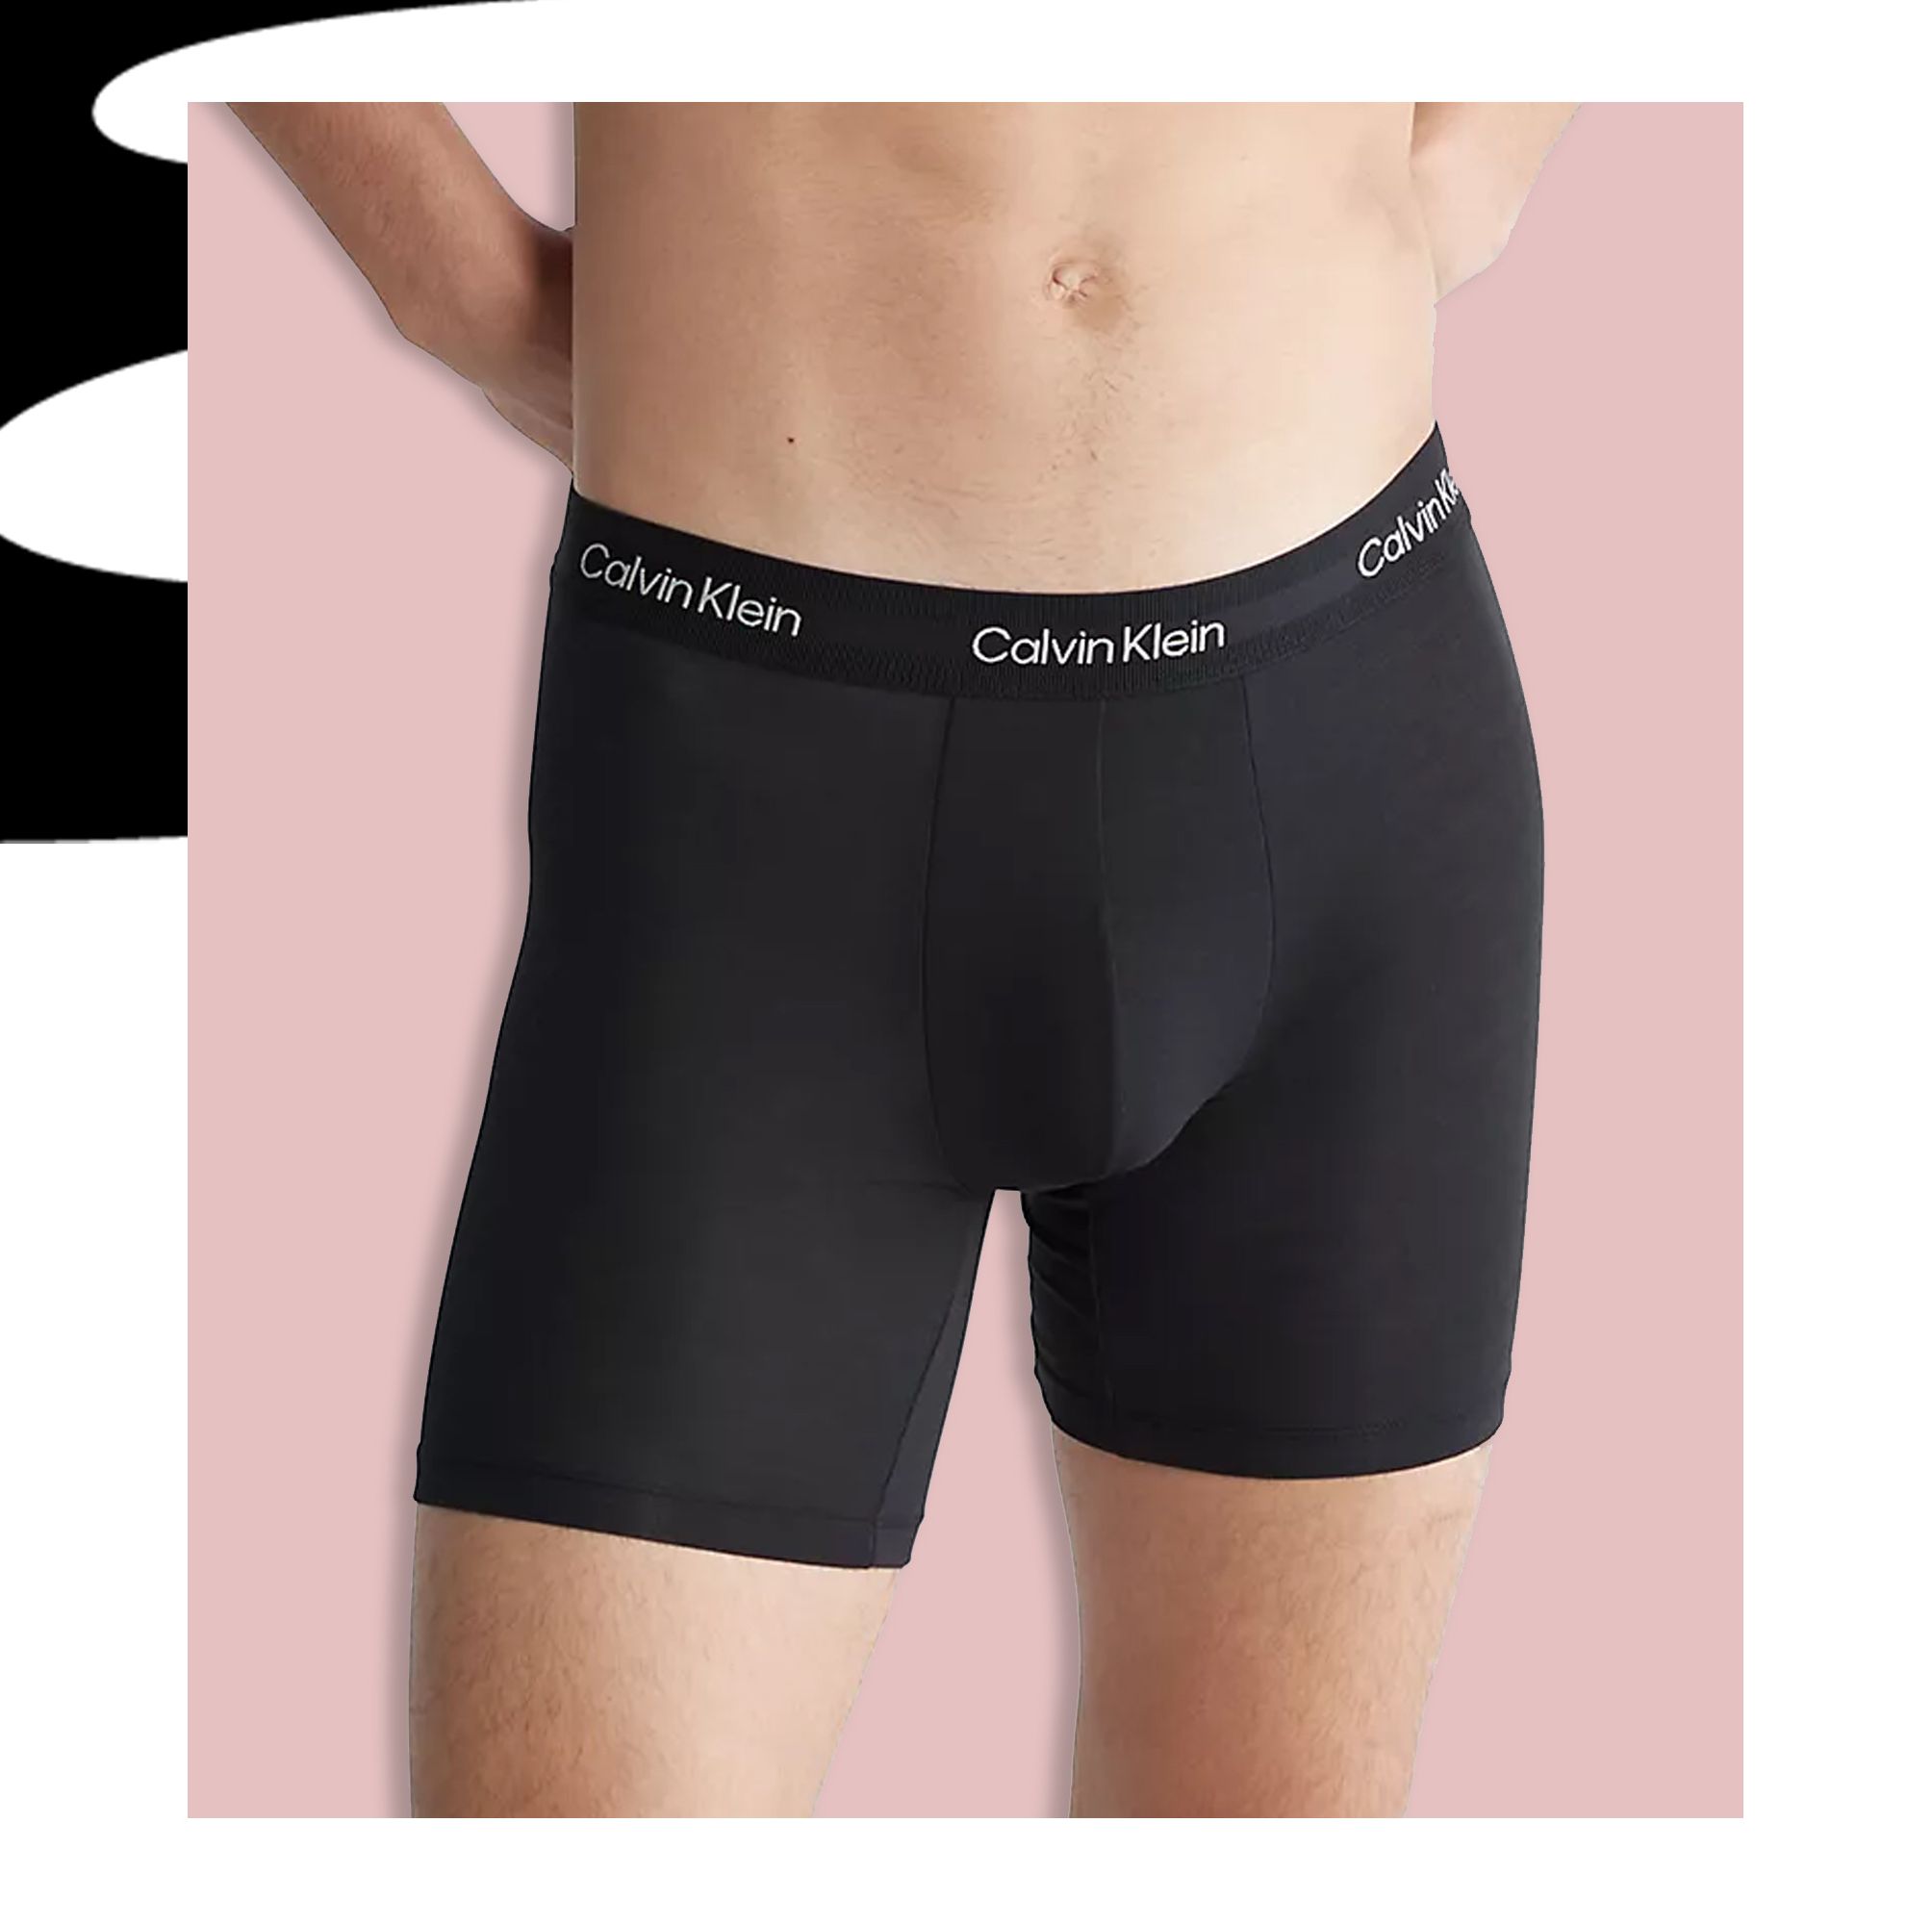 25 Great Pairs of Underwear for Men, According to Pros